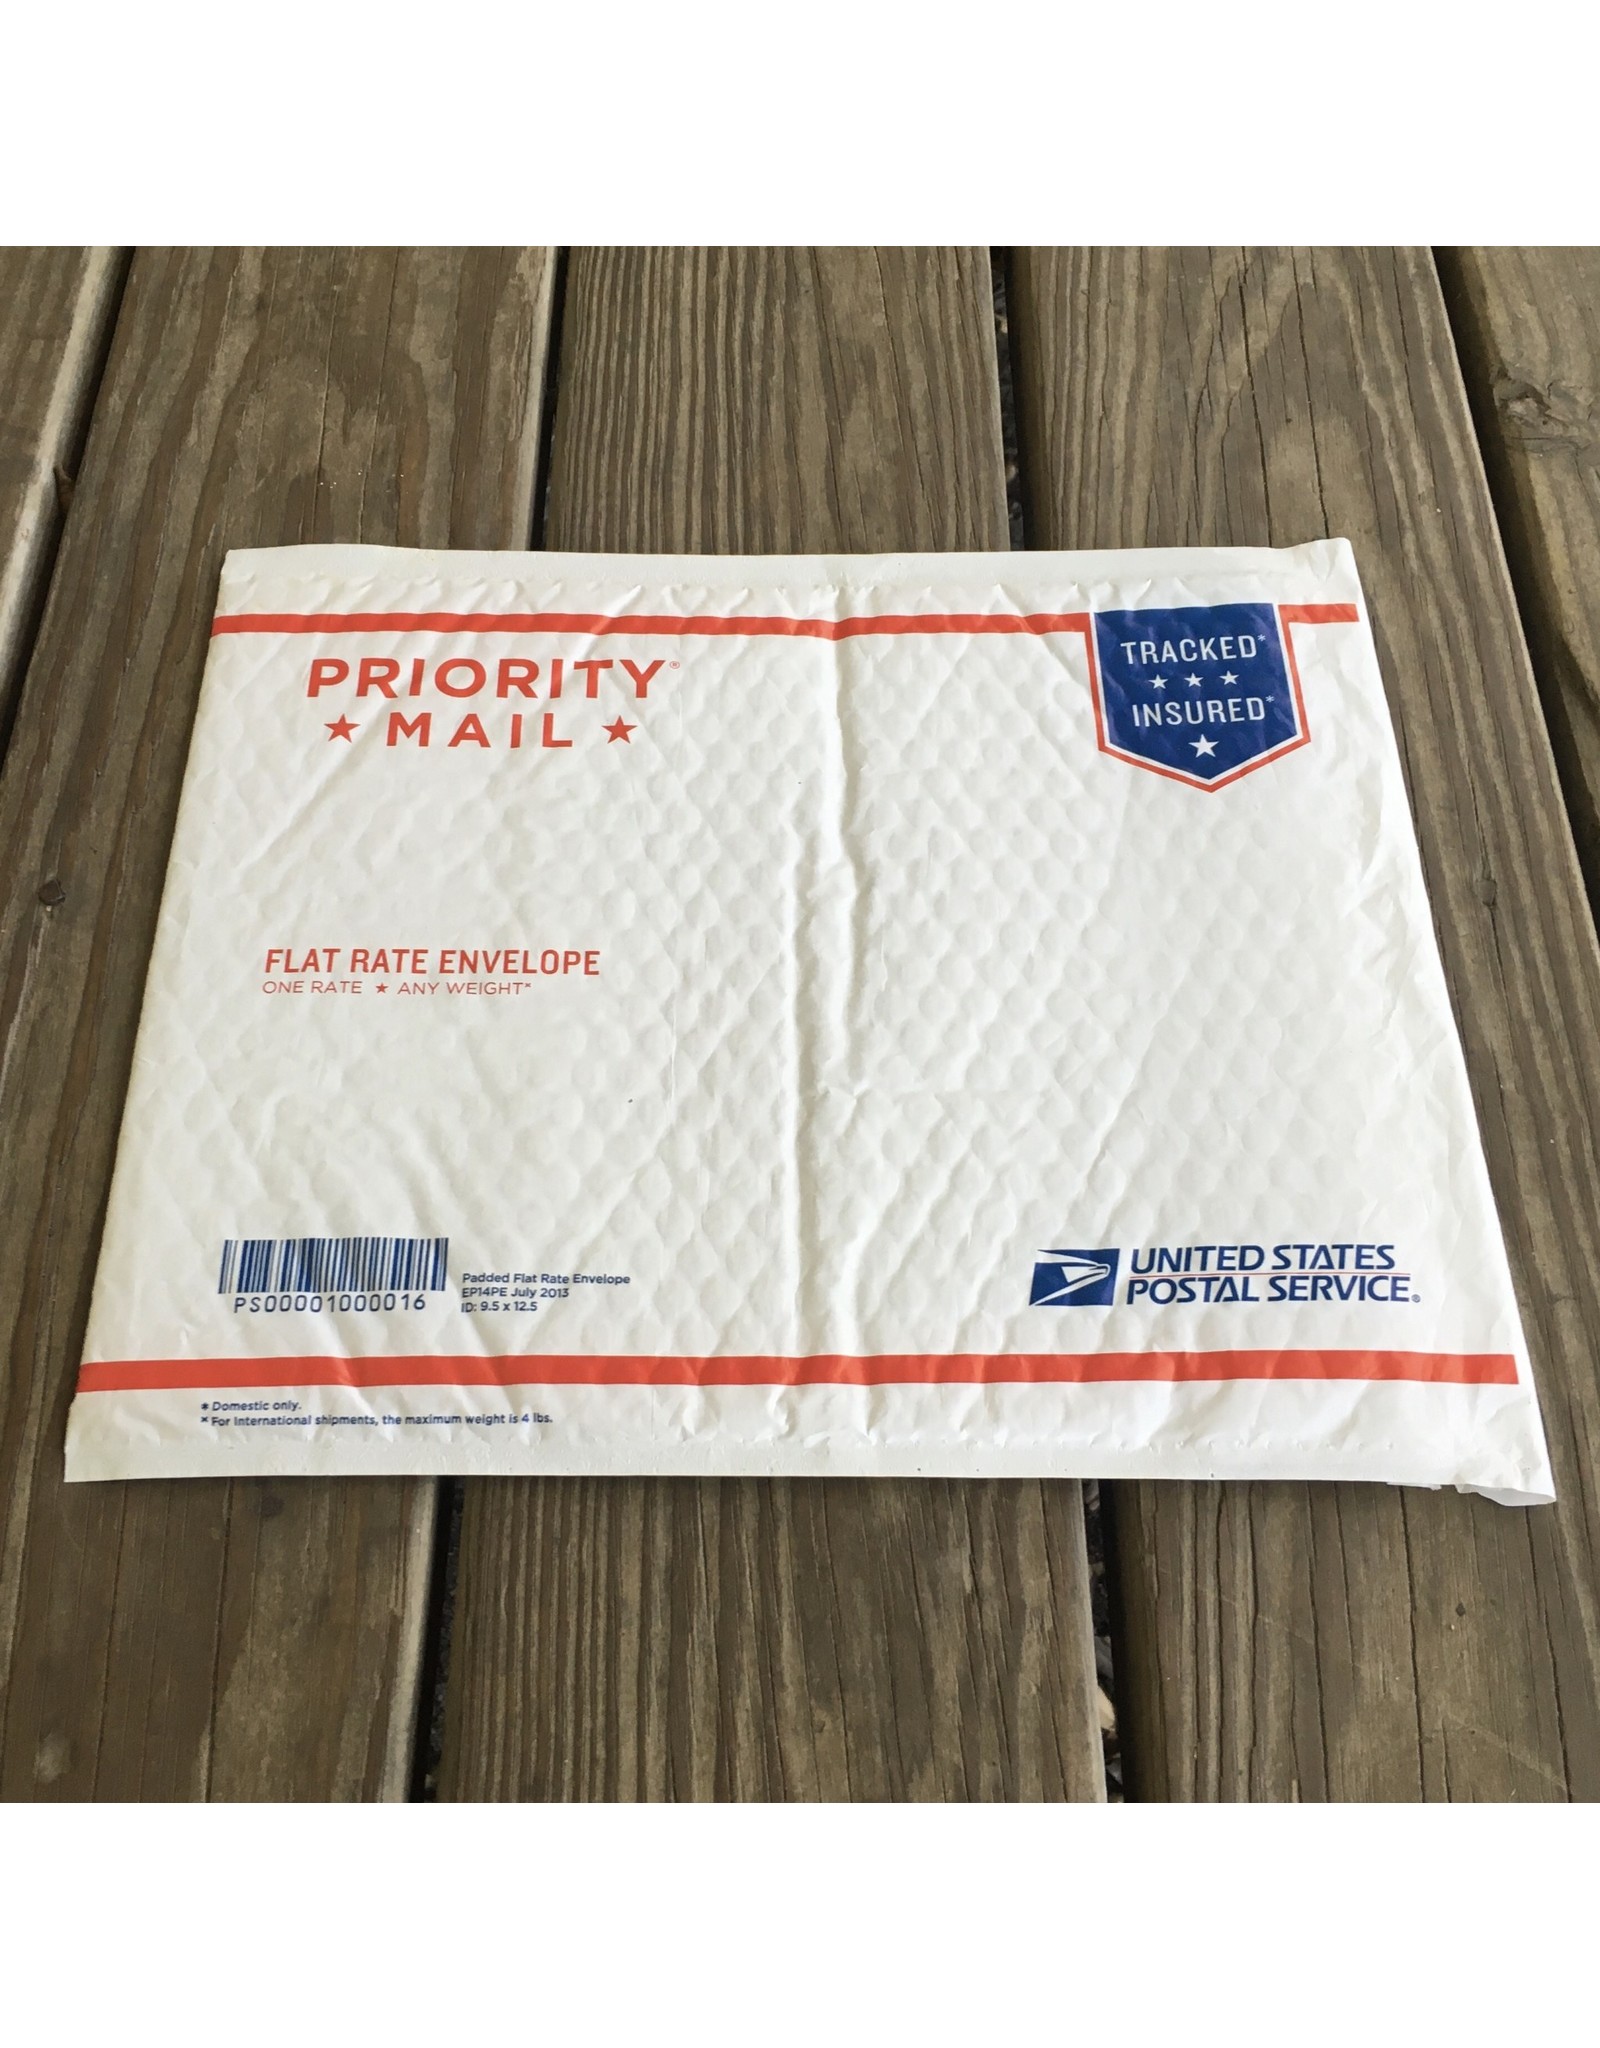 Flat Rate Padded Envelope Cost Outlet Cheap, Save 67 jlcatj.gob.mx